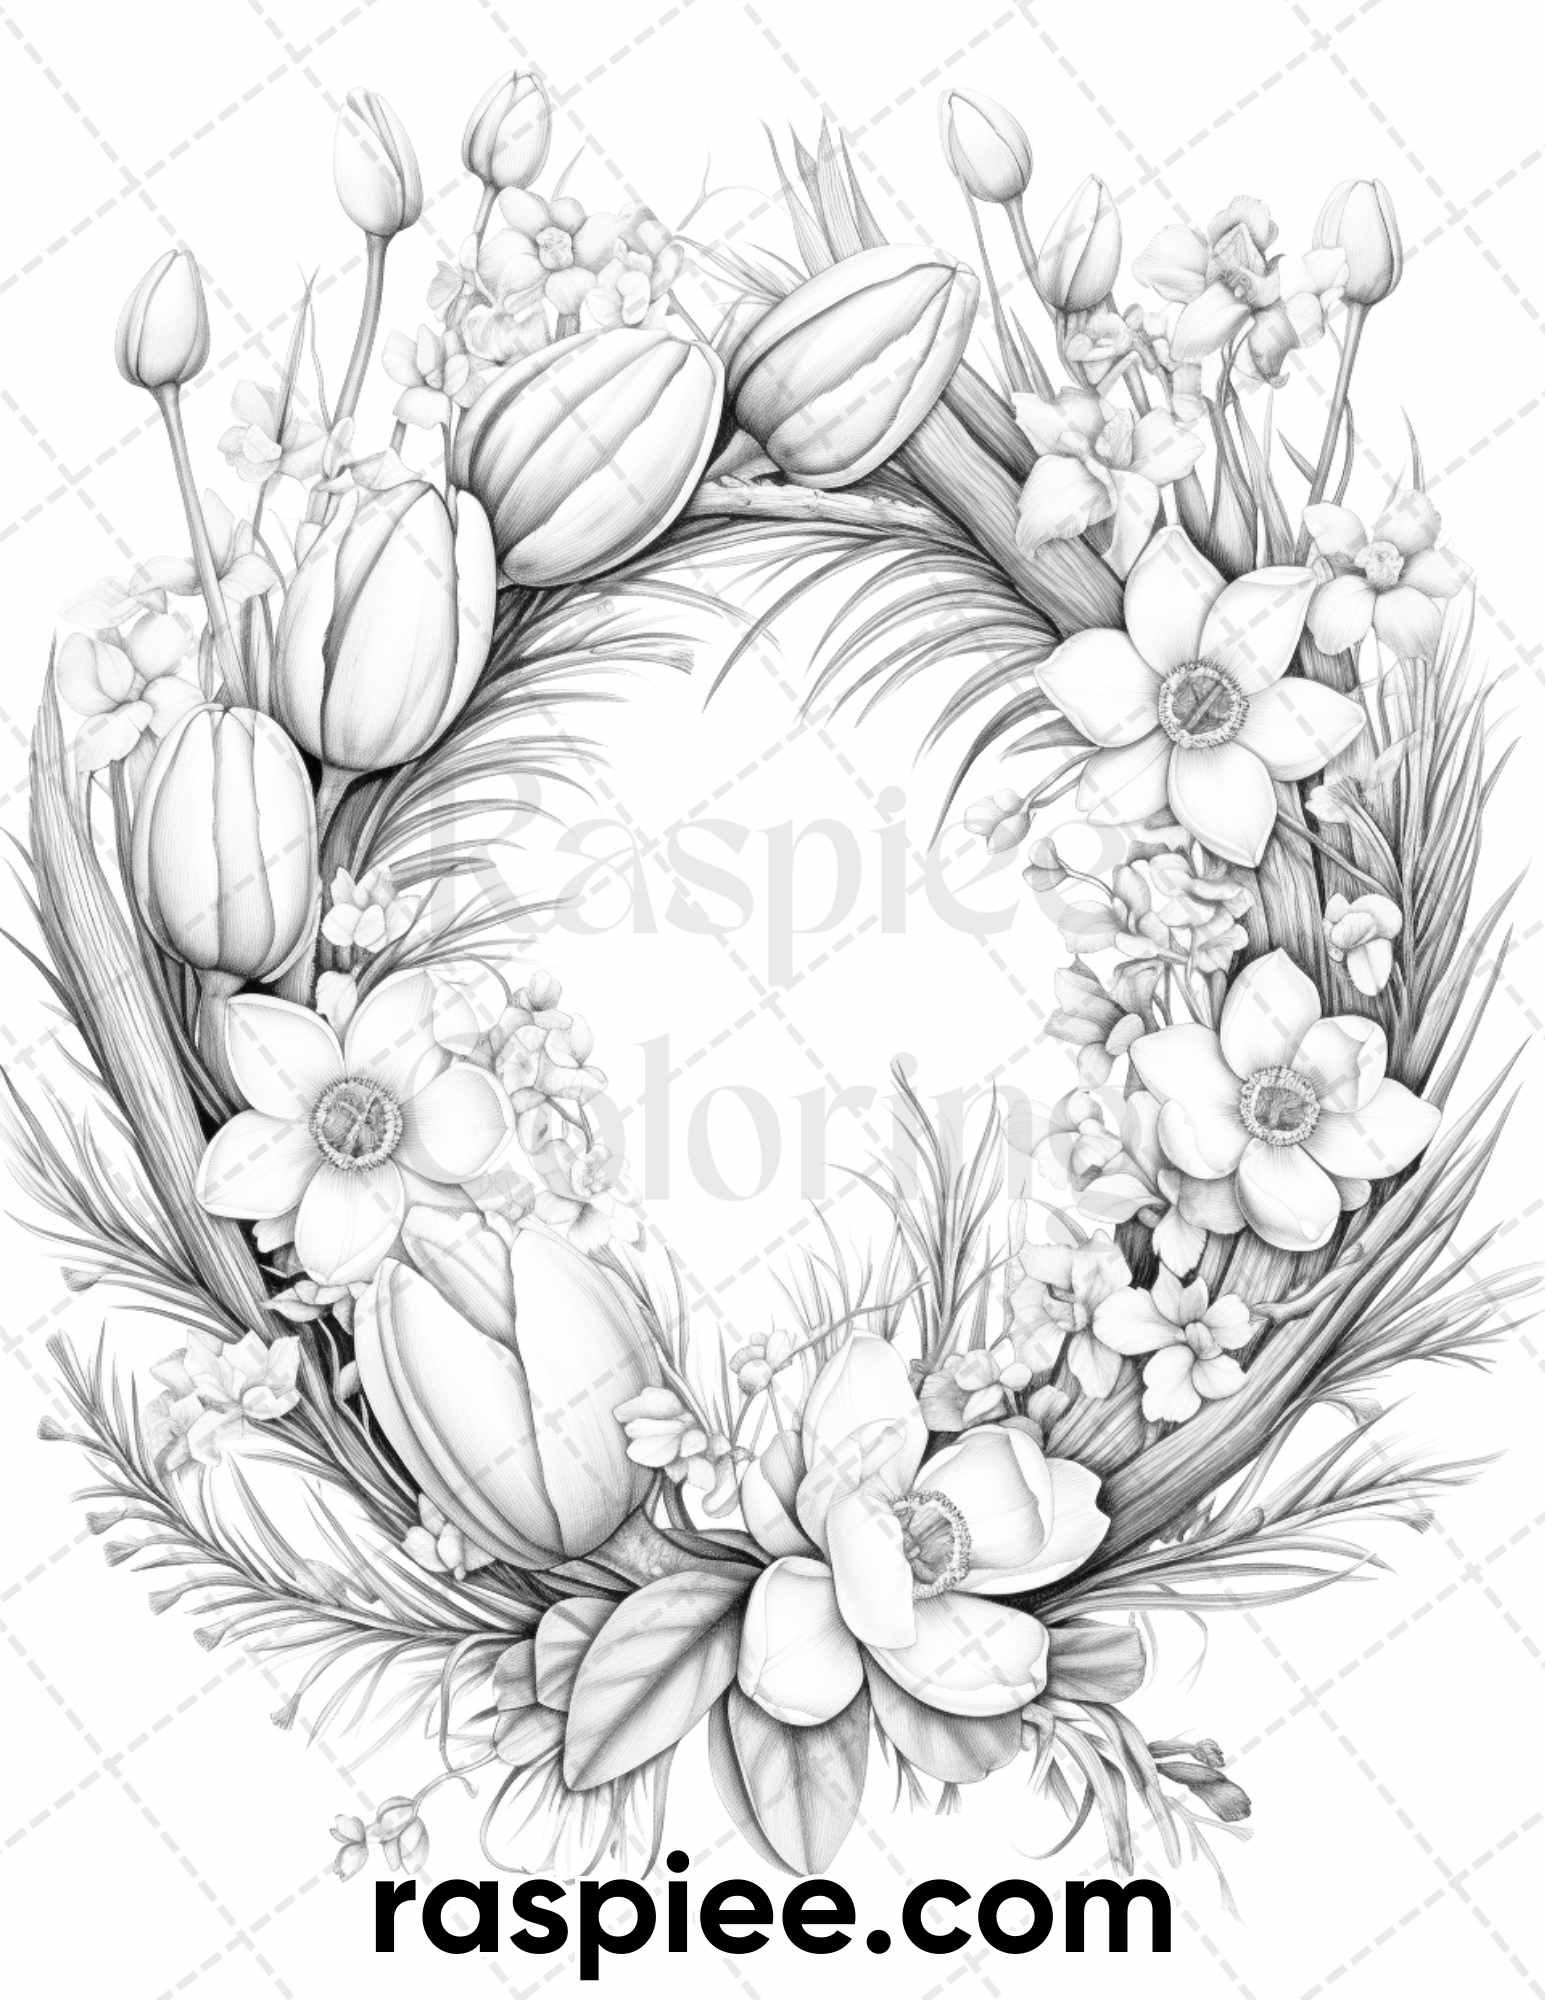 adult coloring pages, adult coloring sheets, adult coloring book pdf, adult coloring book printable, flower coloring pages for adults, flower coloring book printable, flower coloring book pdf, plants coloring pages for adults, plants coloring pages, floral coloring pages, spring coloring pages for adults